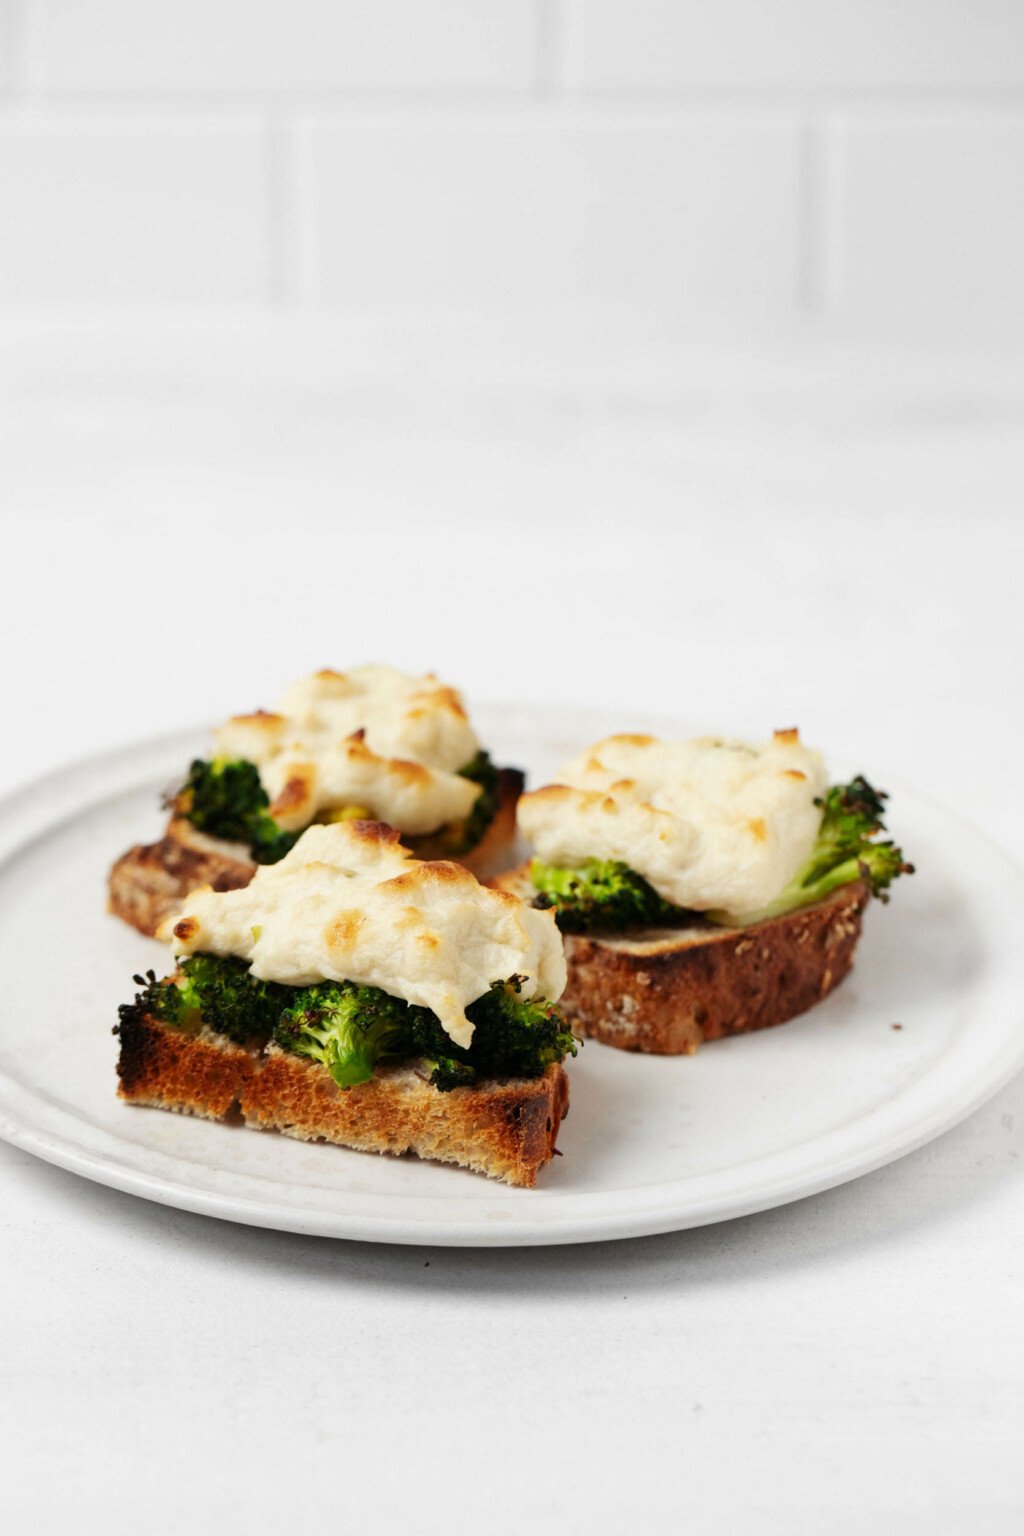 An angular image of a toasted half of bread, topped with a plant-based, mozzarella-style cheese and bright green broccoli florets.  The background has a white tile surface.